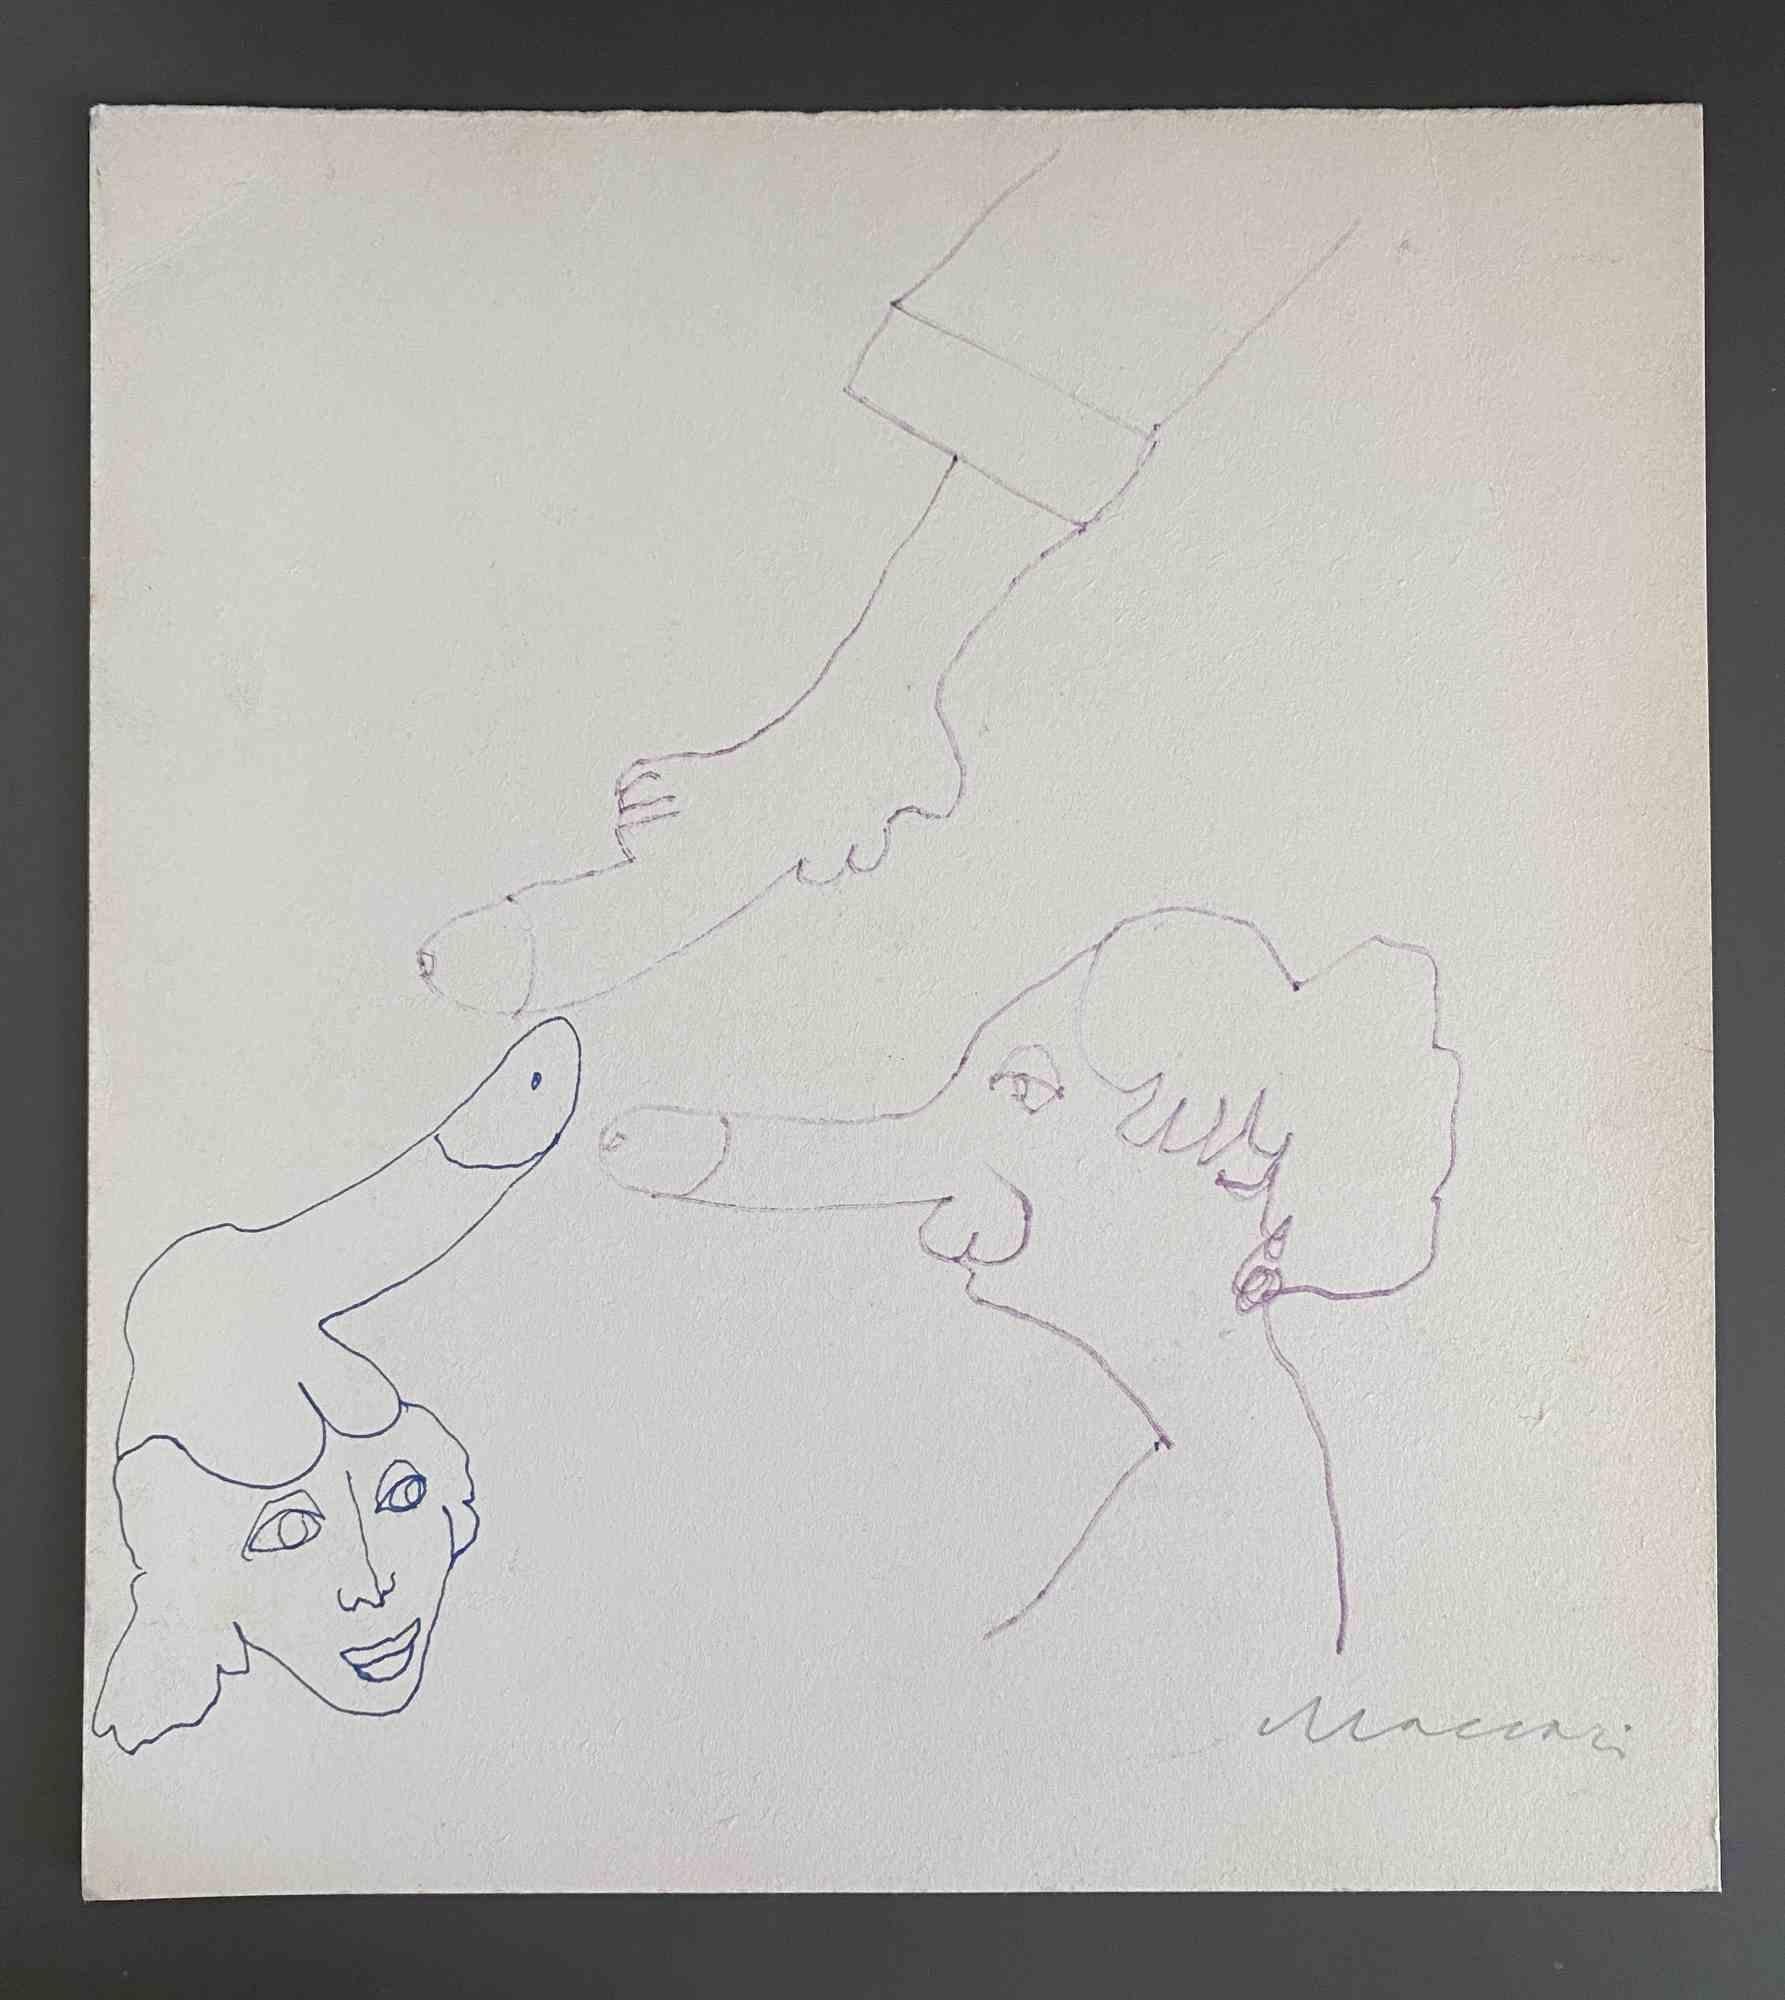 Composition is a pen Drawing realized by Mino Maccari  (1924-1989) in the Mid-20th Century.

Hand-signed on the lower.

Good conditions.

Mino Maccari (Siena, 1924-Rome, June 16, 1989) was an Italian writer, painter, engraver and journalist, winner